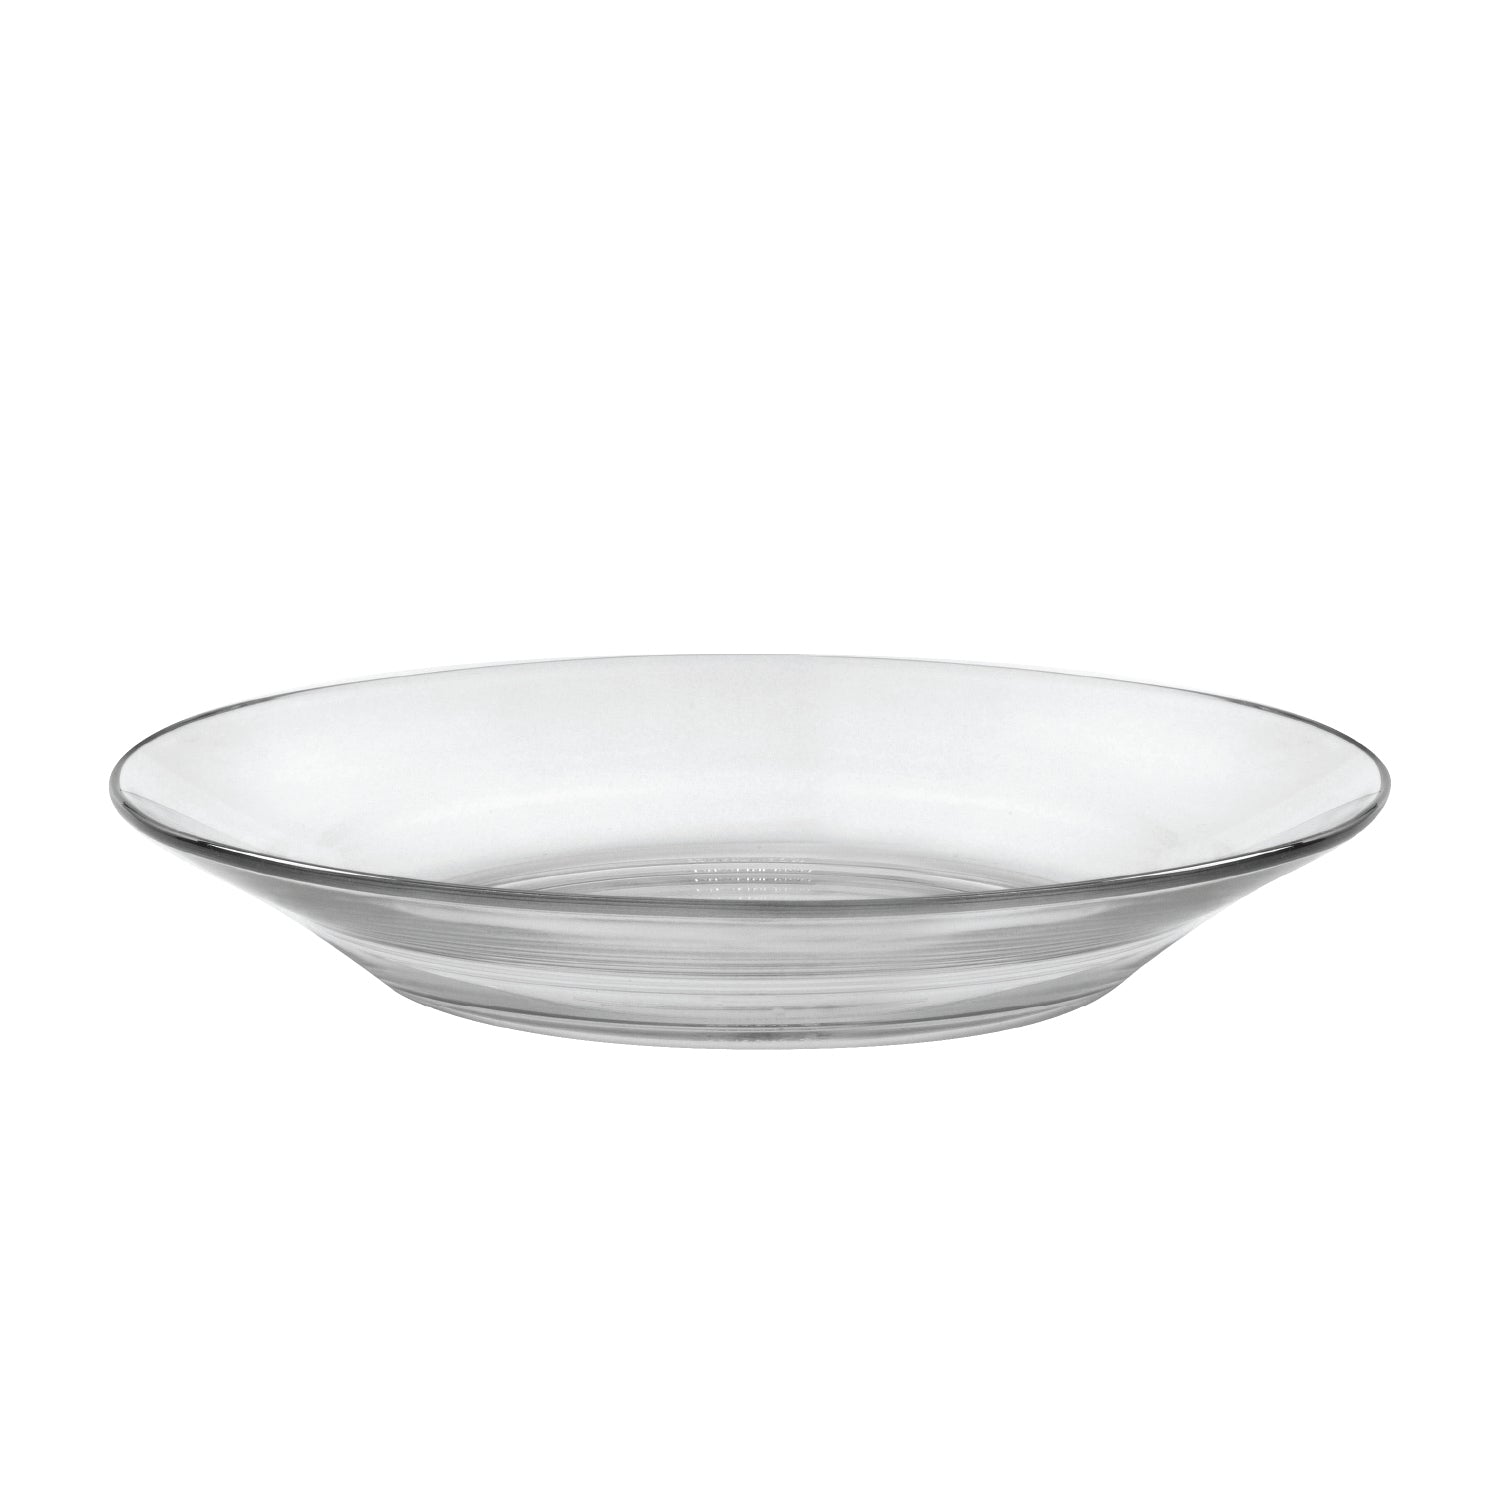 Arbitraje lanza mimar Lys Dinnerware Soup Plate | Duralex USA | Made In France